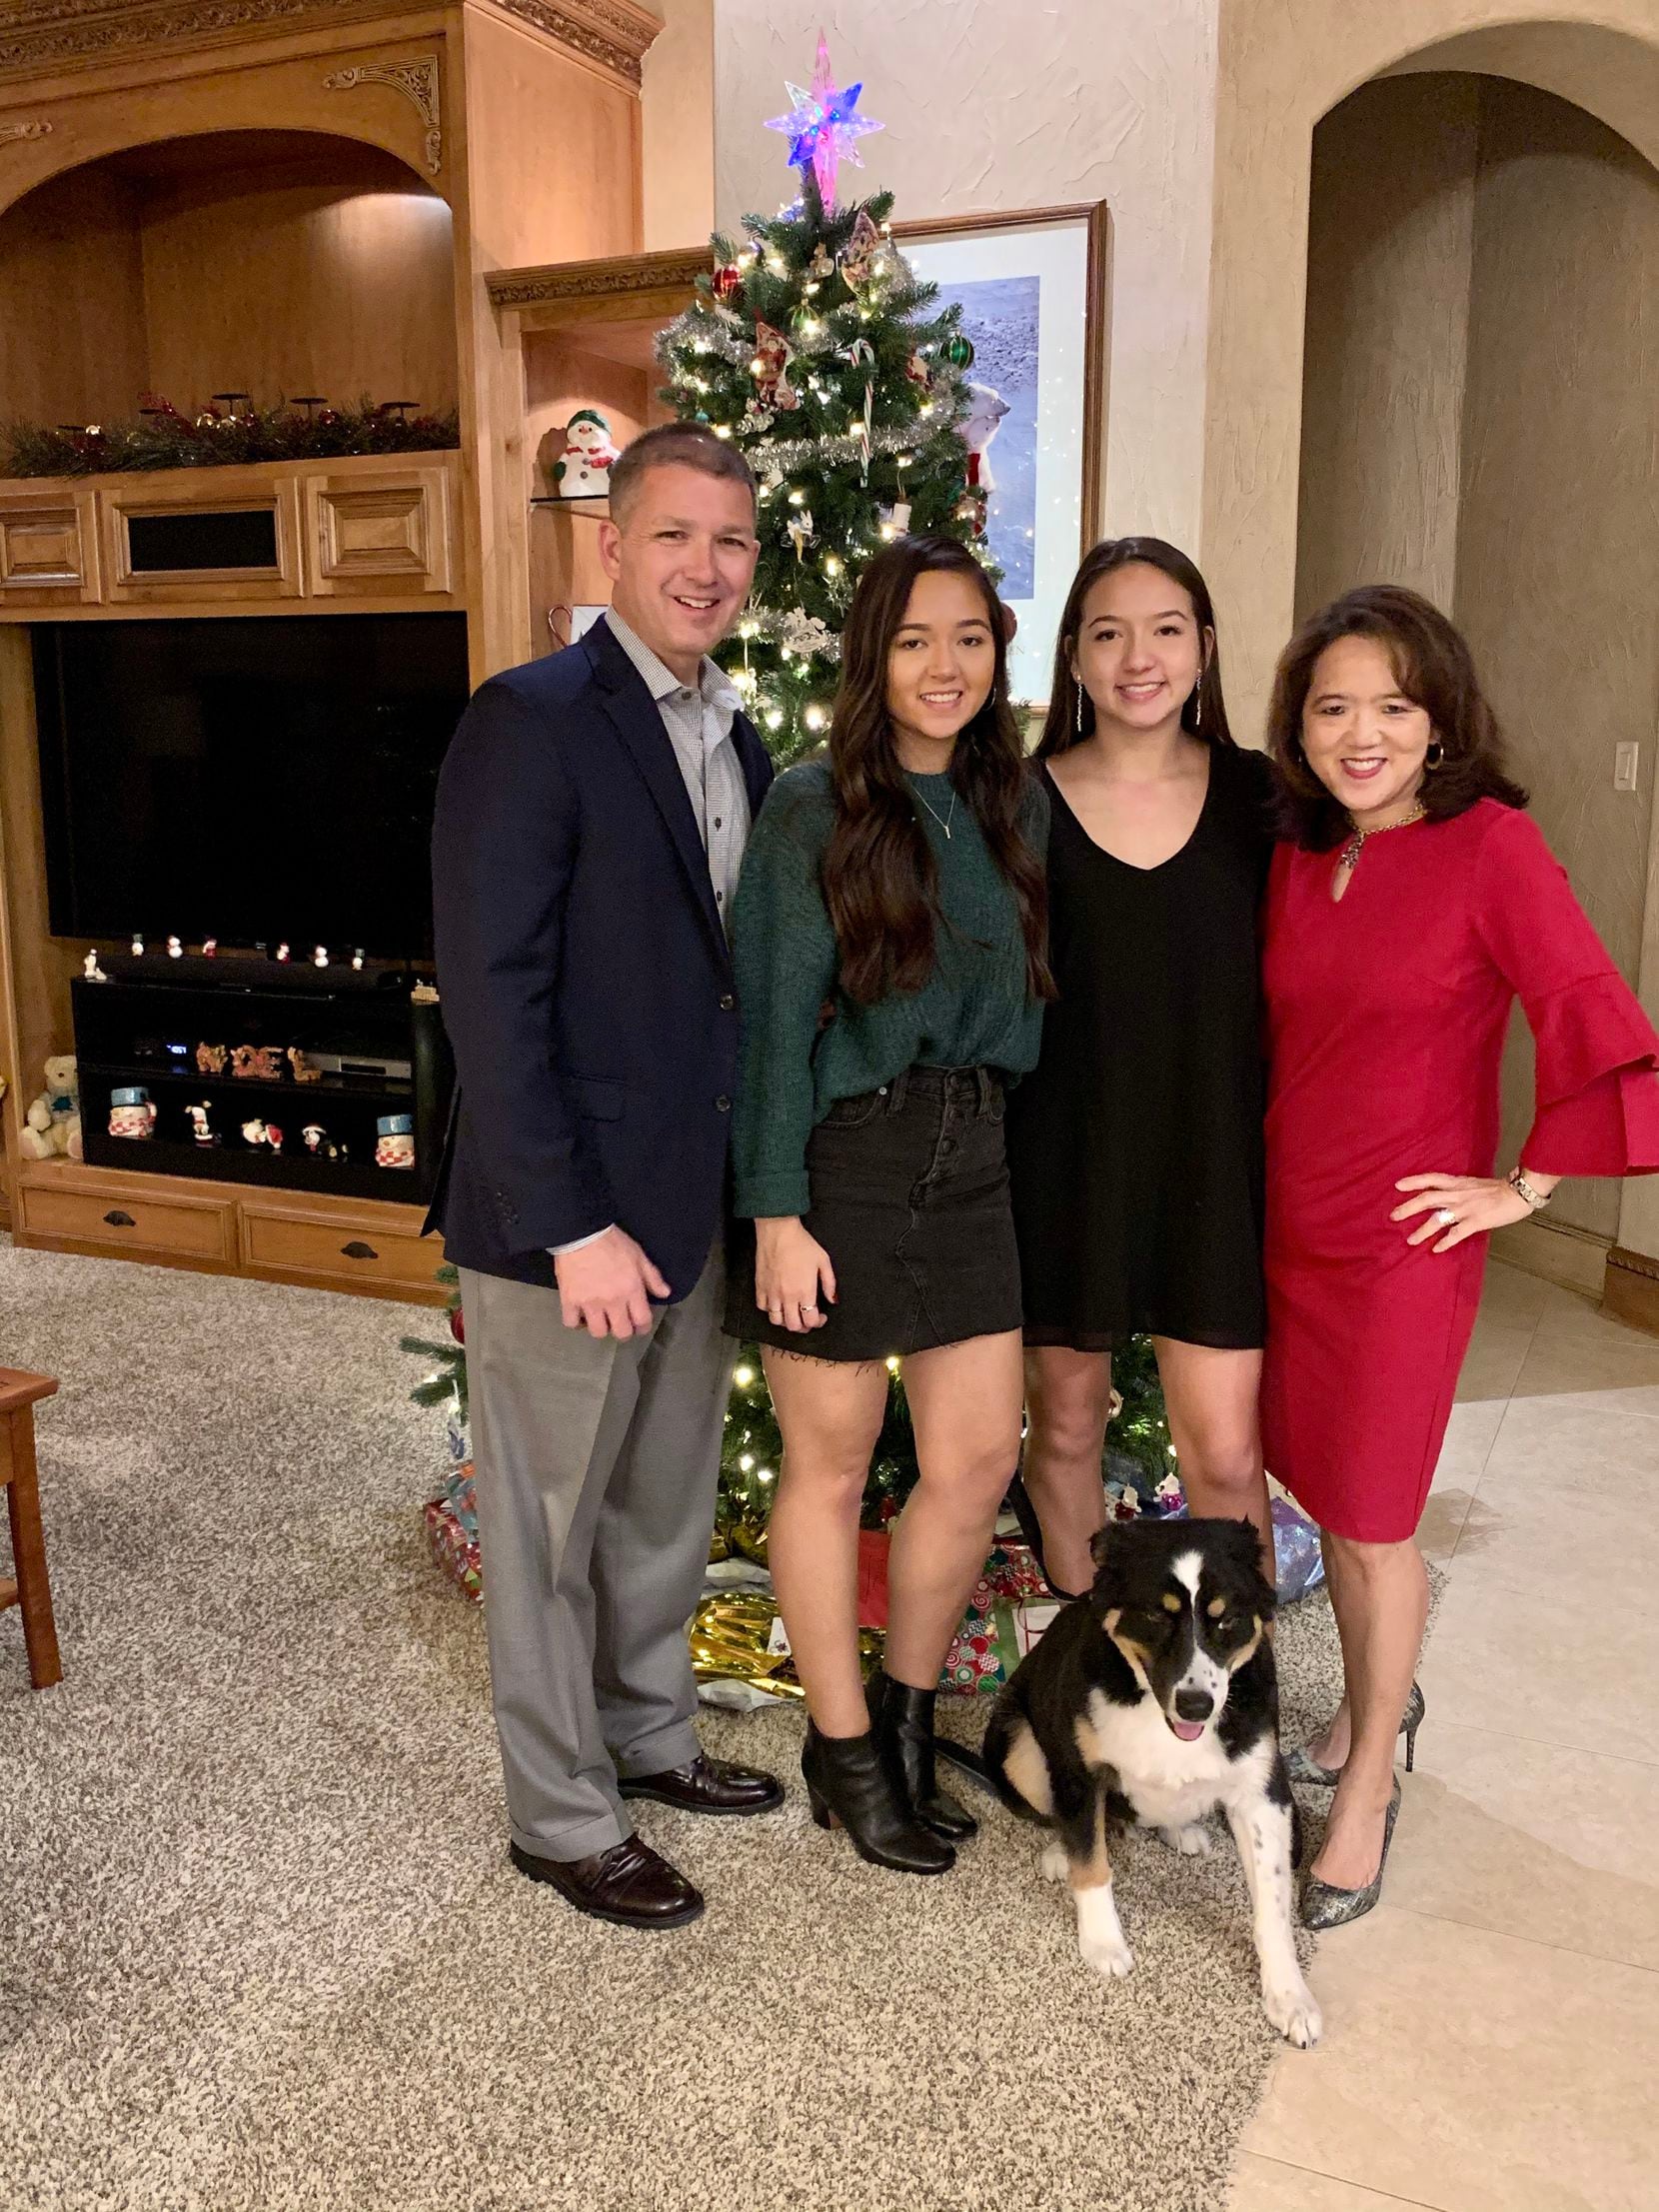 A Christmas 2019 photo of Bob Moore and Anne Chow with their daughters, Alana and Camryn Moore.